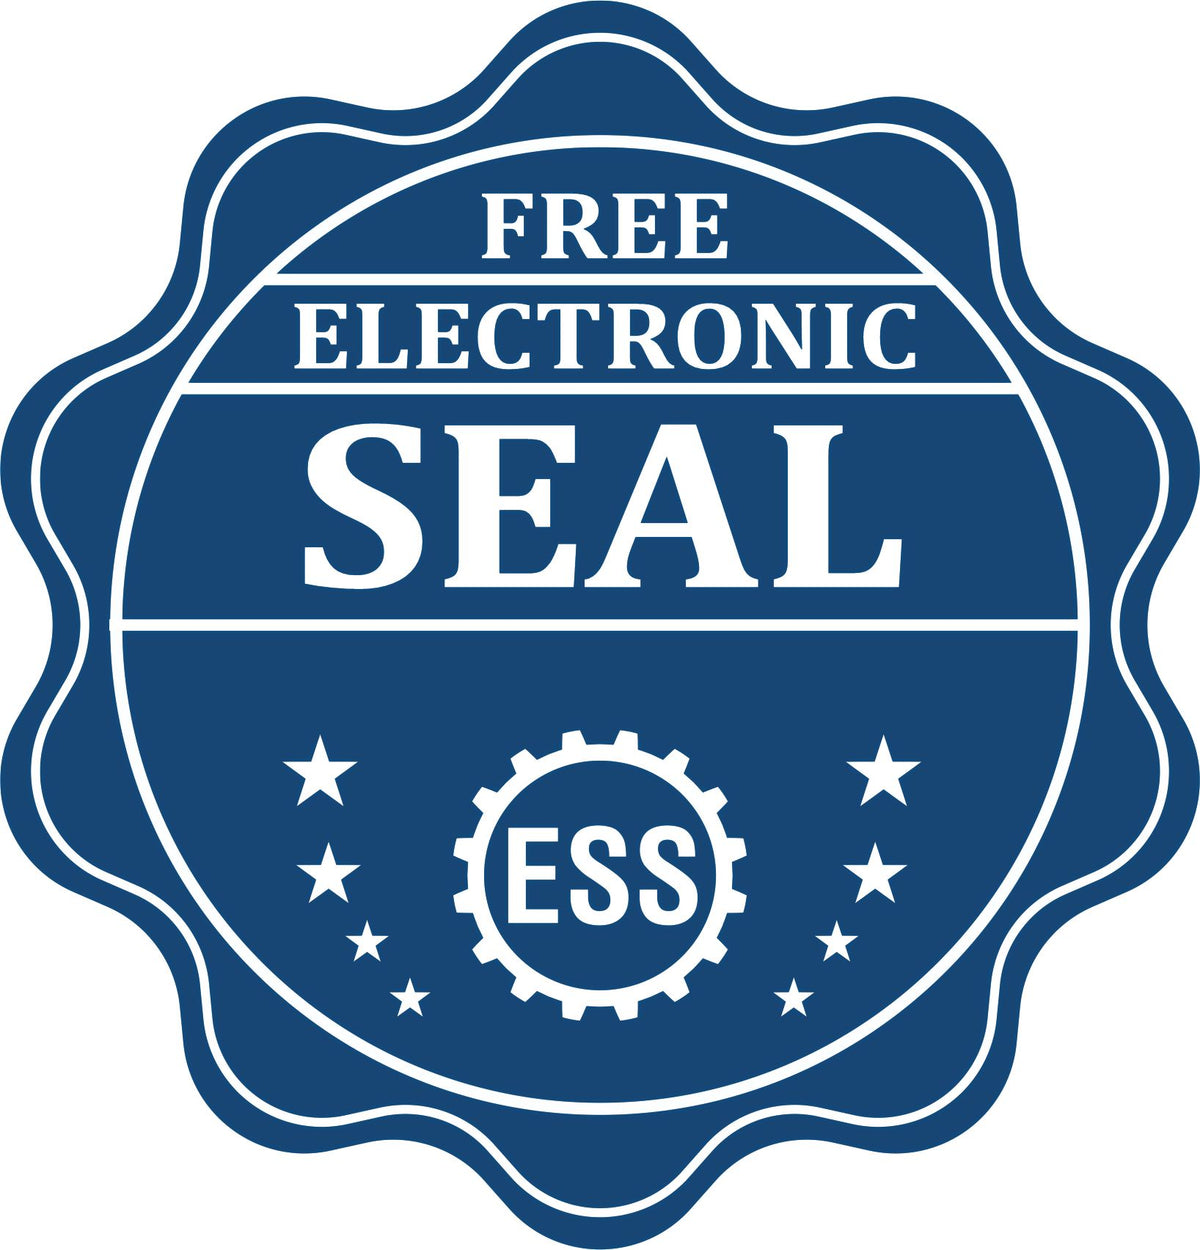 A badge showing a free electronic seal for the Slim Pre-Inked State Seal Notary Stamp for Alaska with stars and the ESS gear on the emblem.